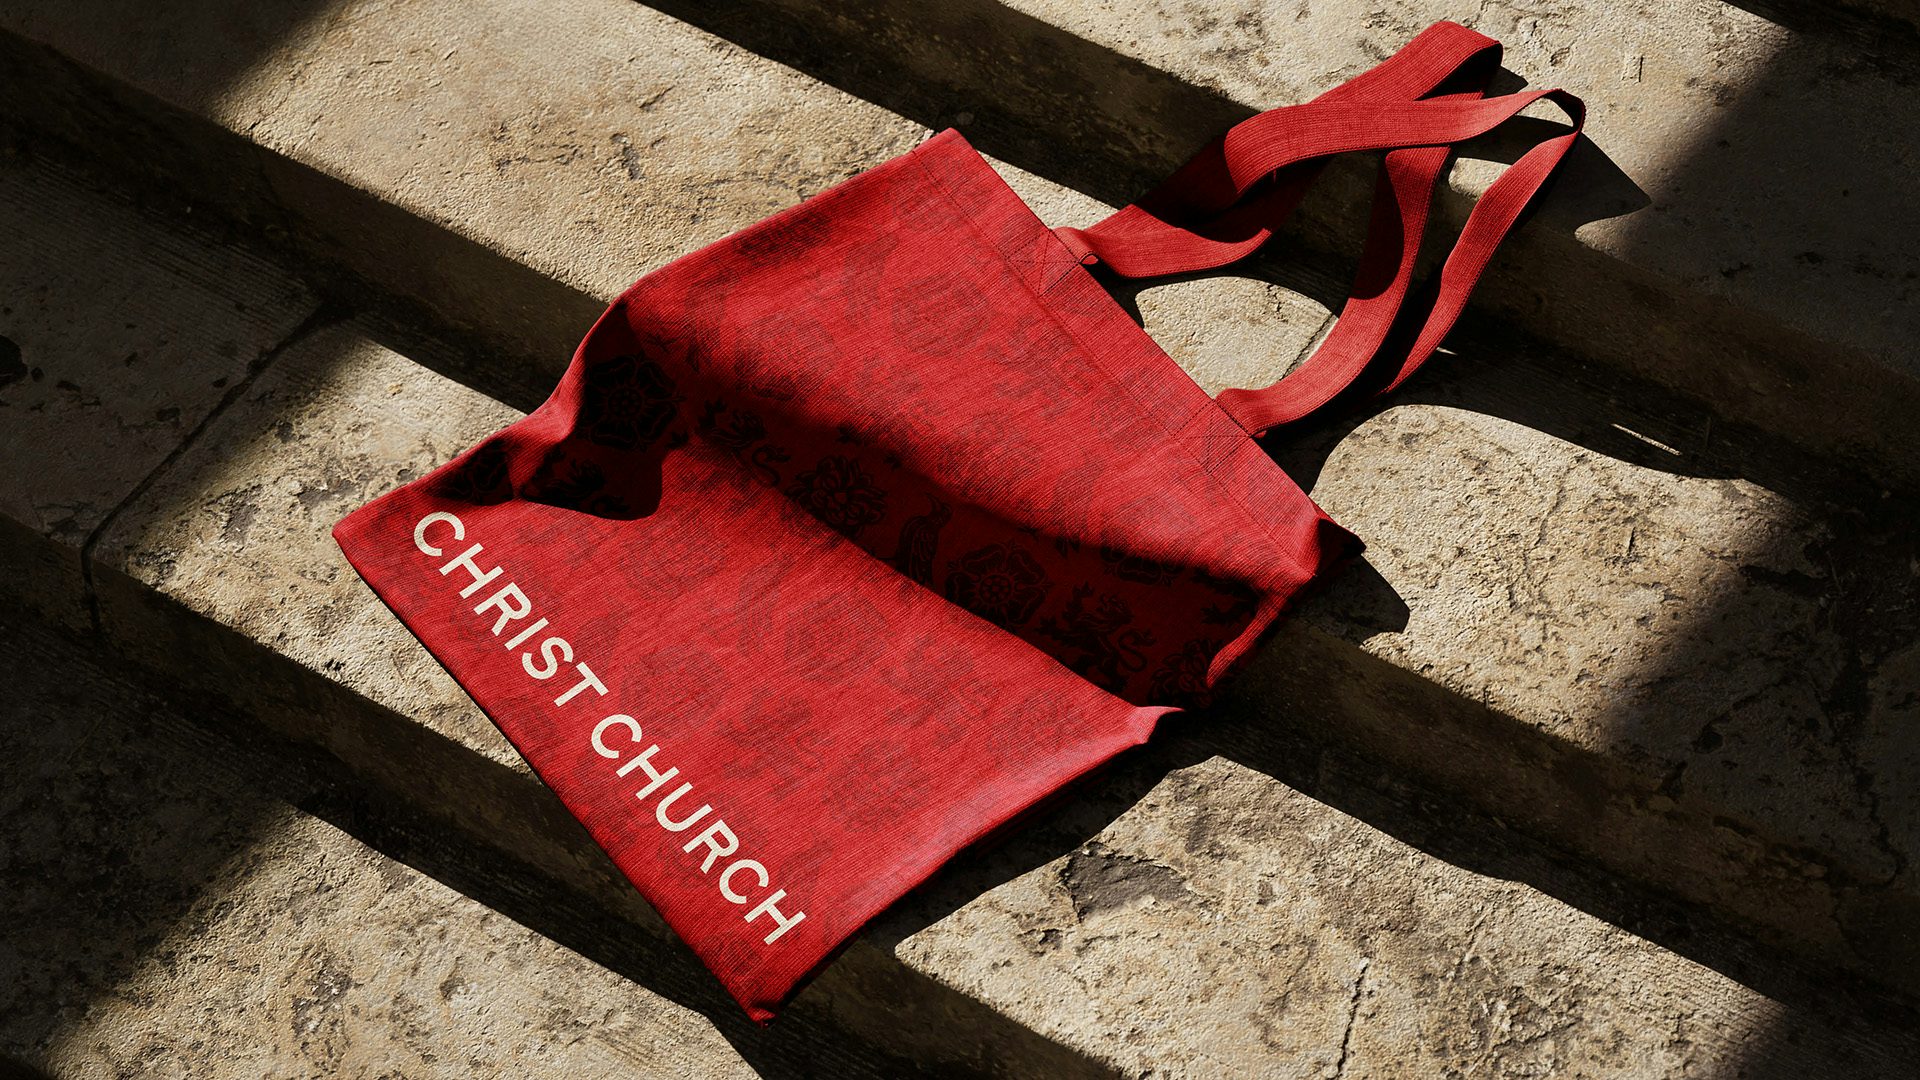 Photo showing Christ Church Oxford's branding on a red tote bag